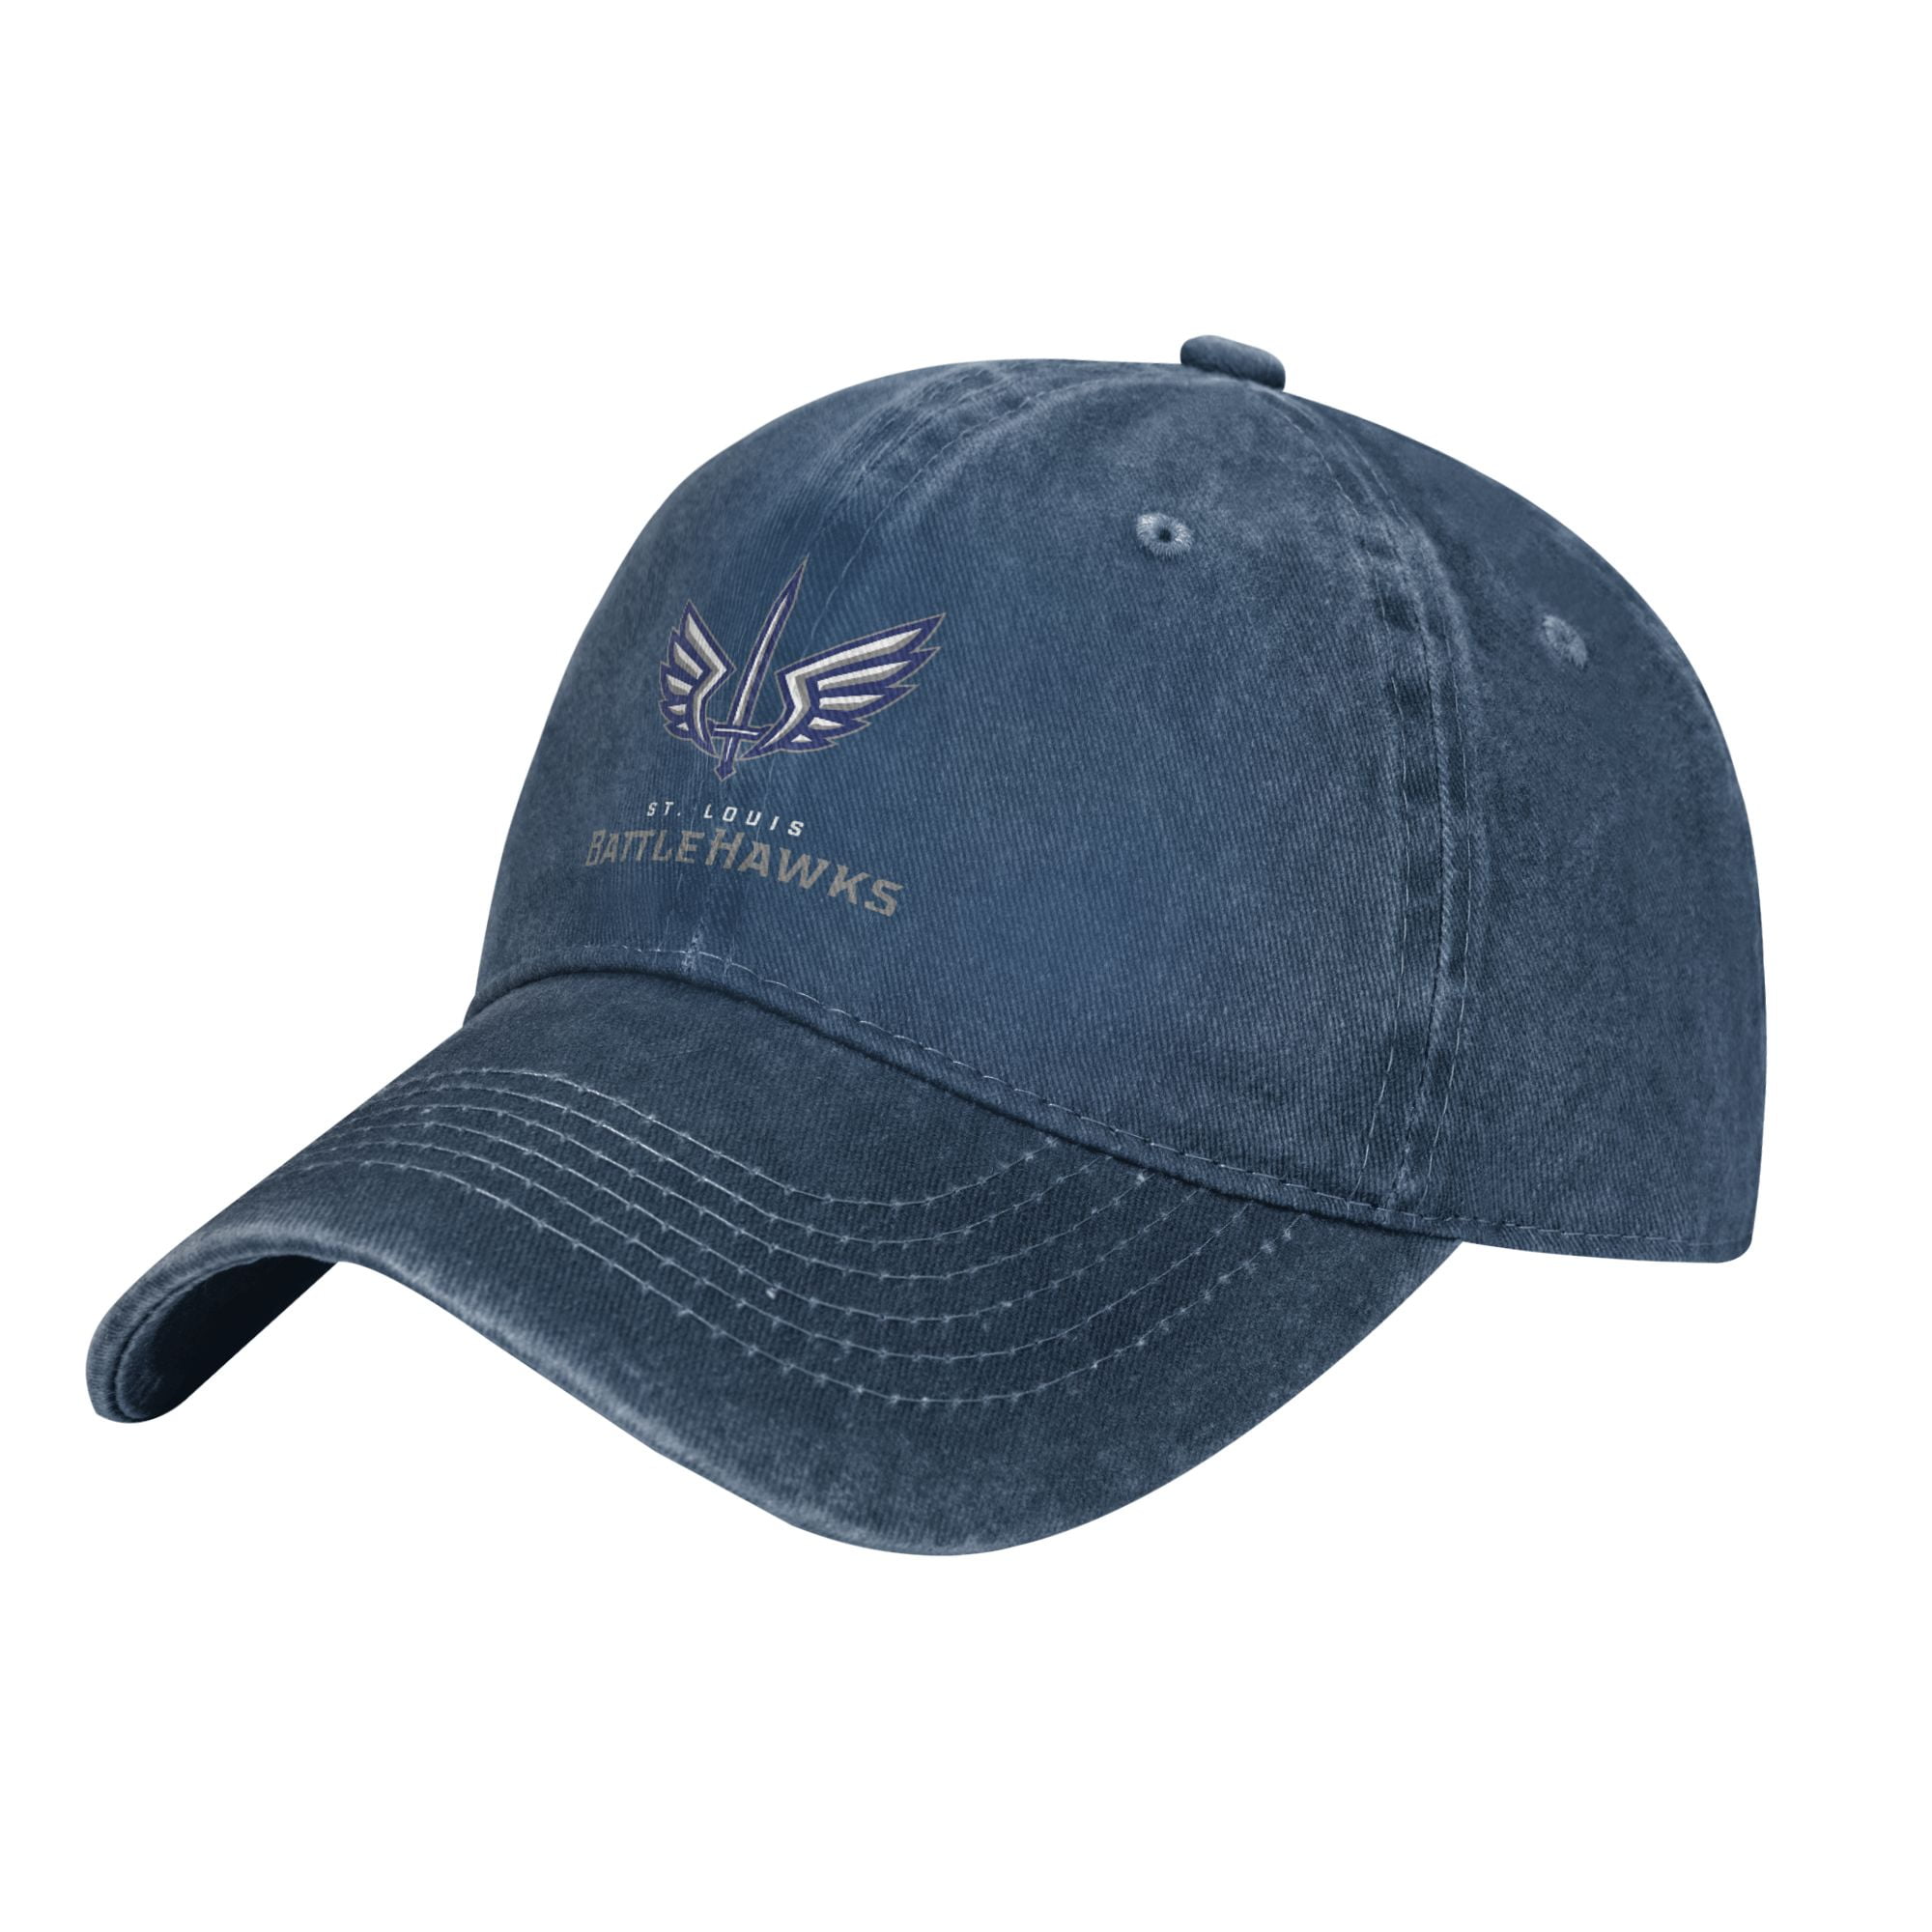 Navy blue ball cap with St. Louis Blues embroidered